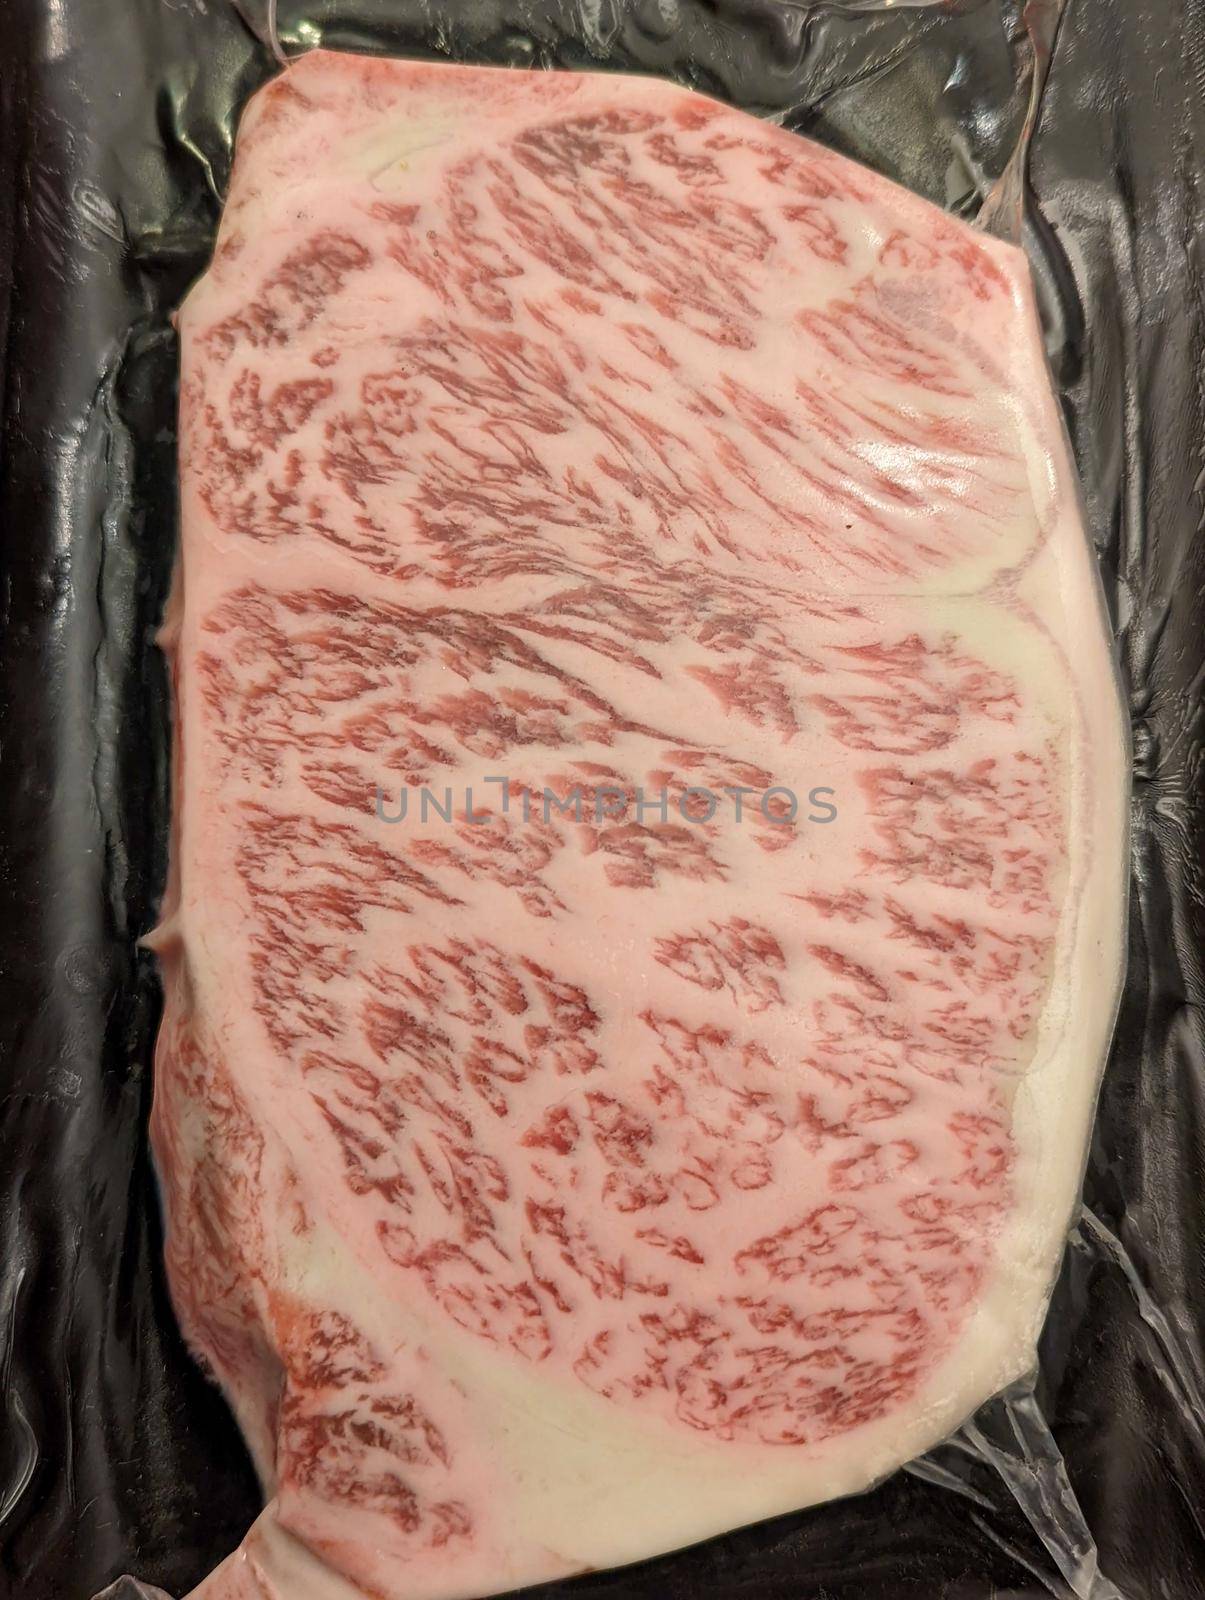 Premium Rare Slices many parts of Wagyu A5 beef with high-marbled texture by digidreamgrafix